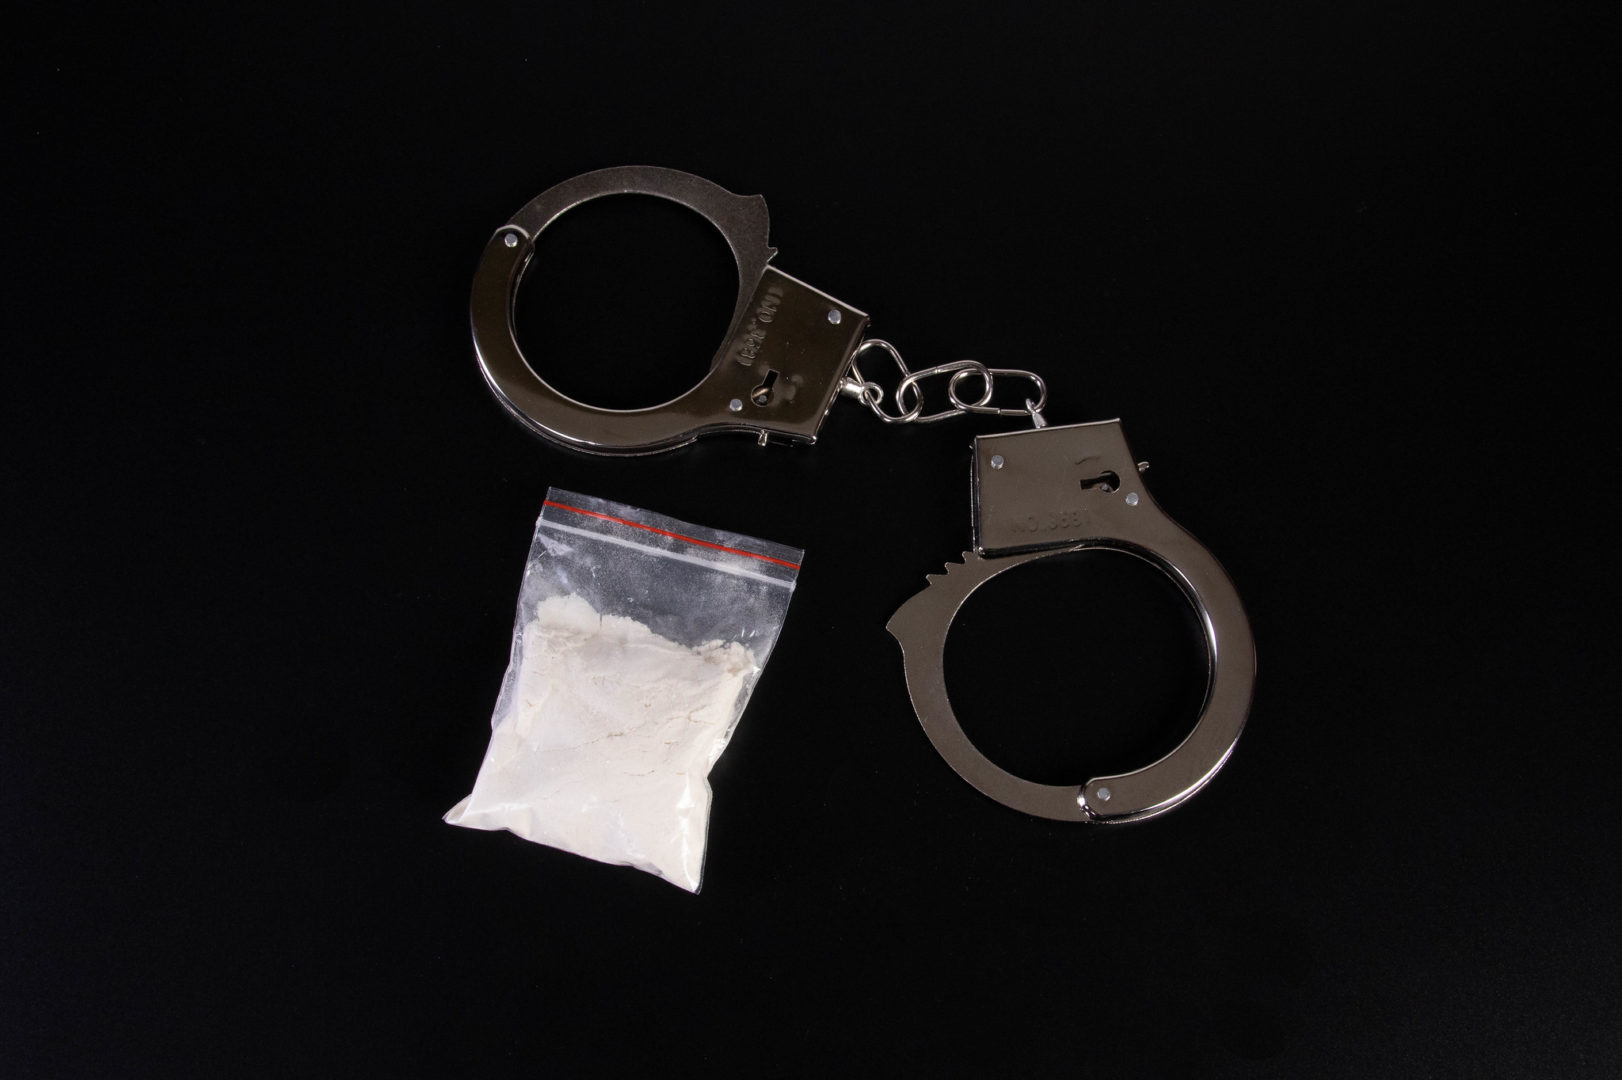 a pair of handcuffs and a baggy full of white powder against a black background